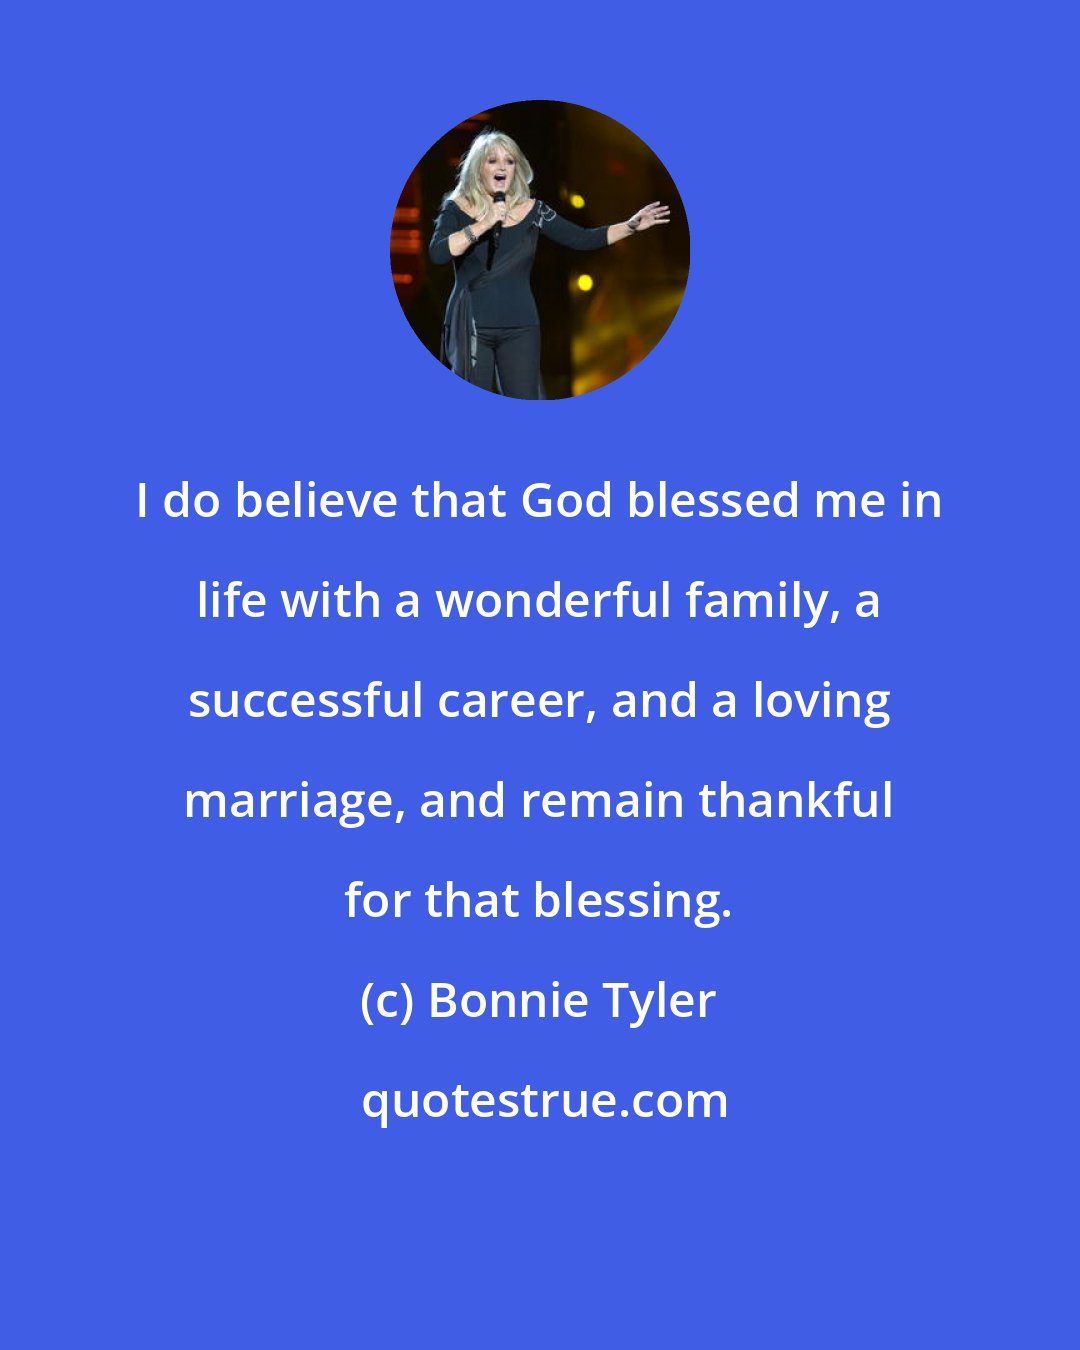 Bonnie Tyler: I do believe that God blessed me in life with a wonderful family, a successful career, and a loving marriage, and remain thankful for that blessing.